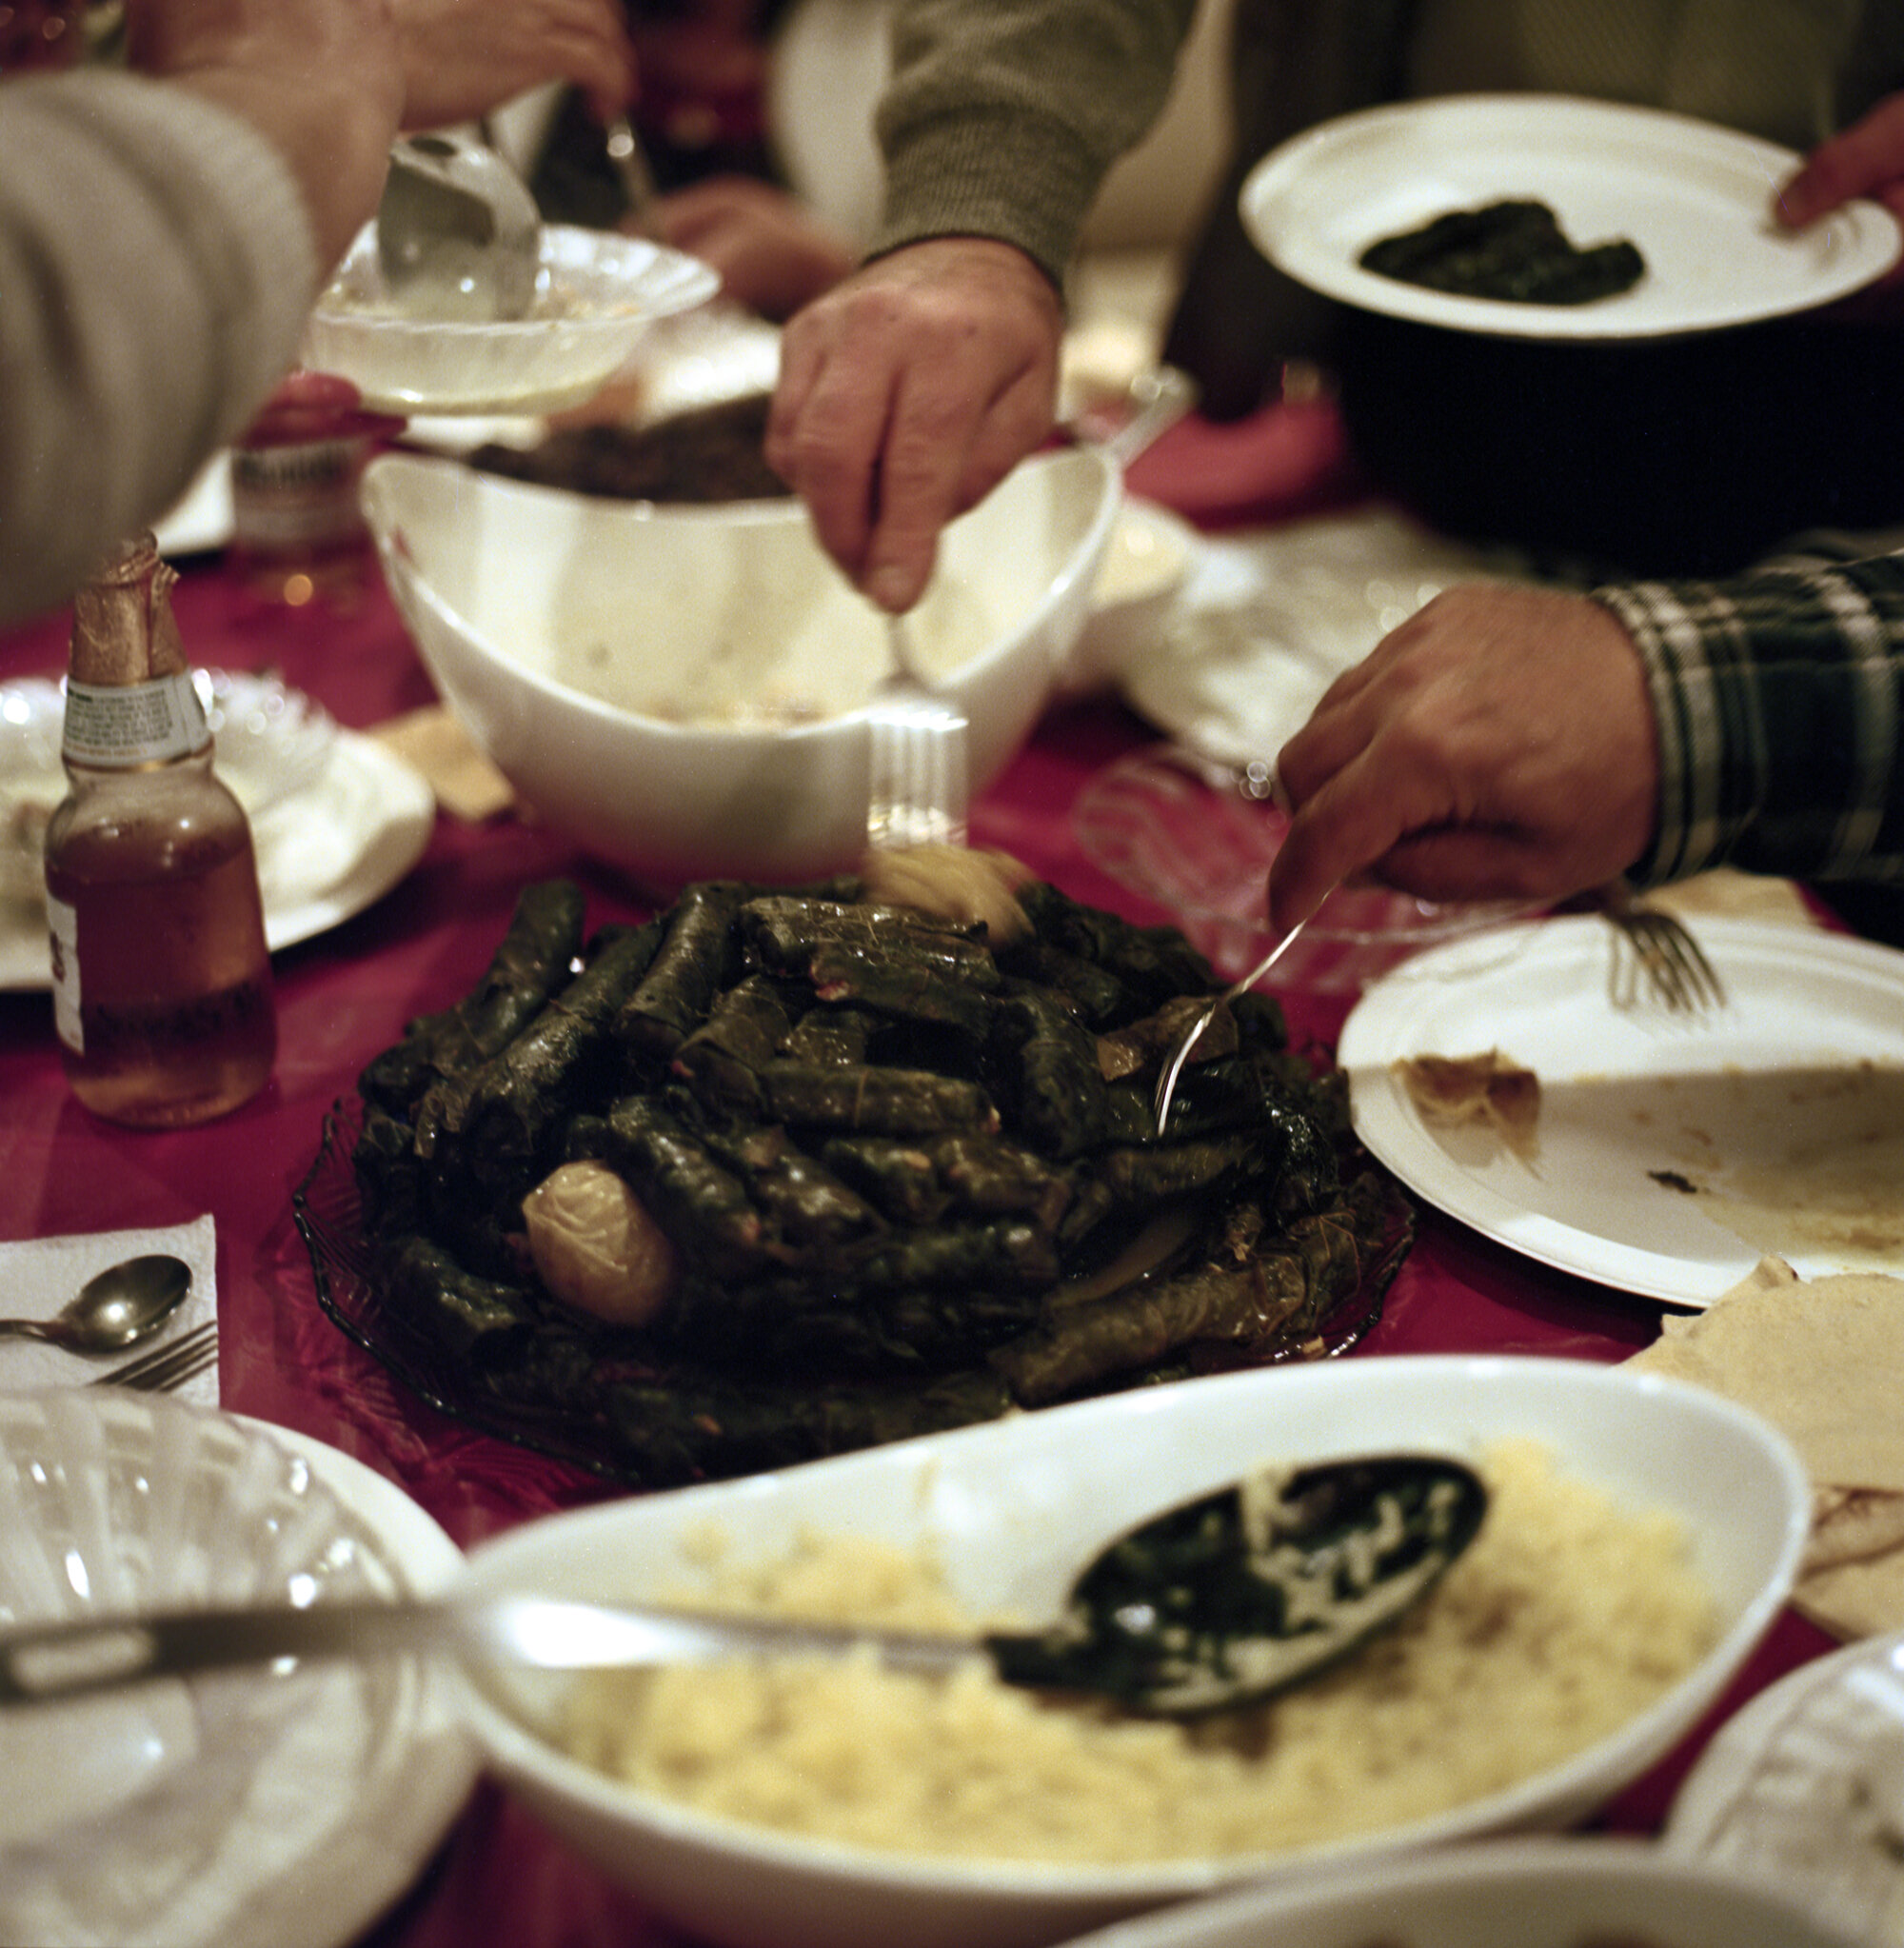  Members of the Charshafjian, Hallajian, and Tavitian families reach for hand made Sarma during Easter dinner. Food is one of the main parts of diaspora communities that serve as vessels for sharing of culture. The Sarma are made of spices meat and r